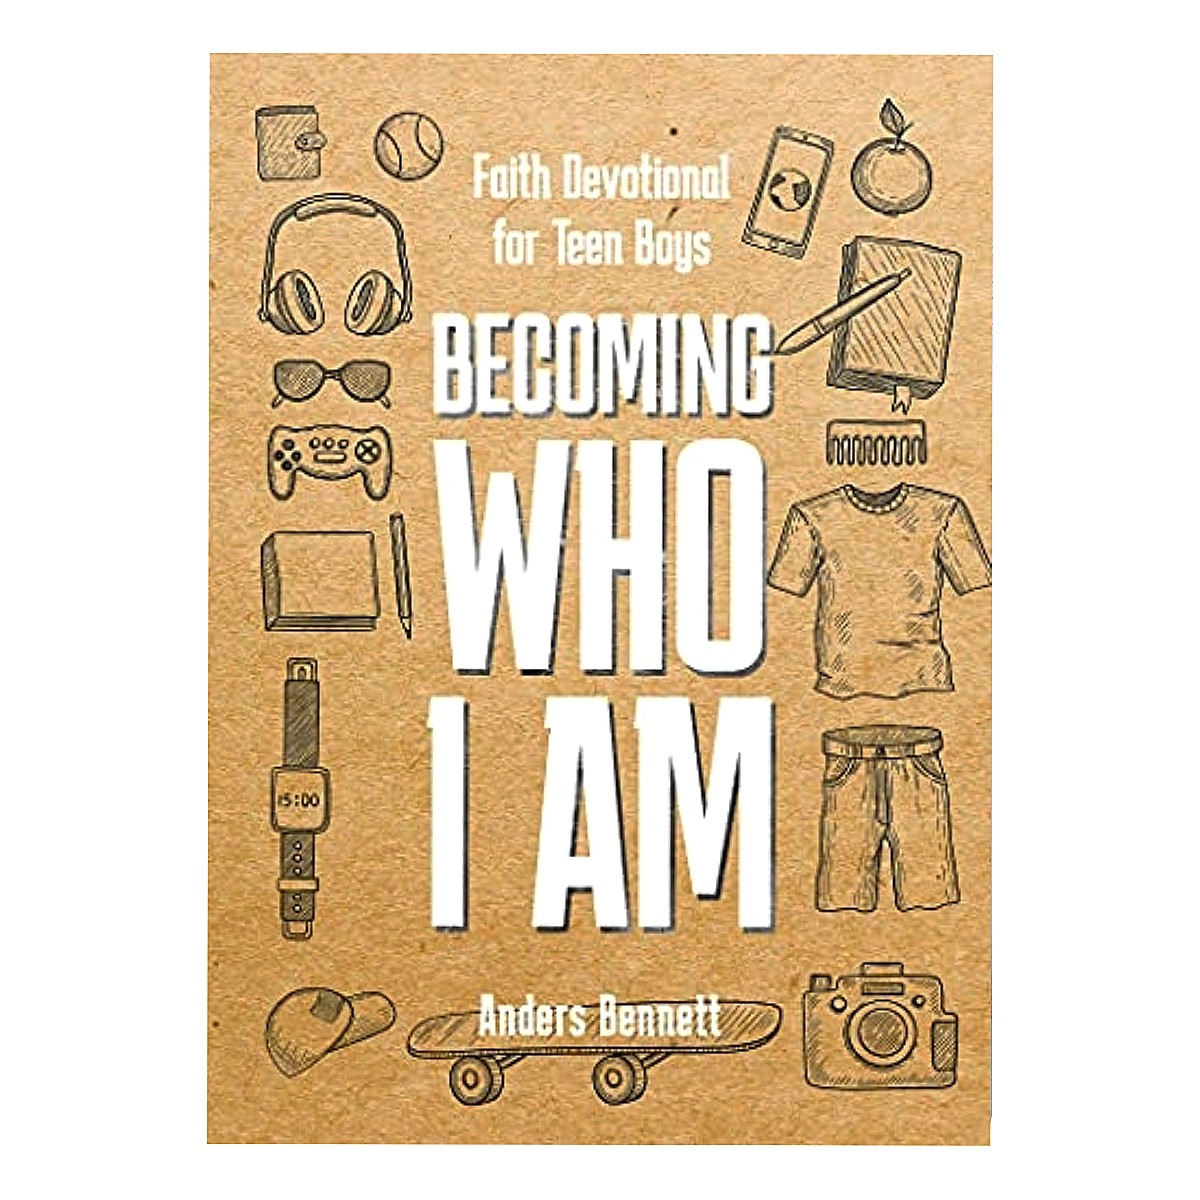 For Teens. Becoming Who I am - Devotional for Teen Boys (13-18 yrs)